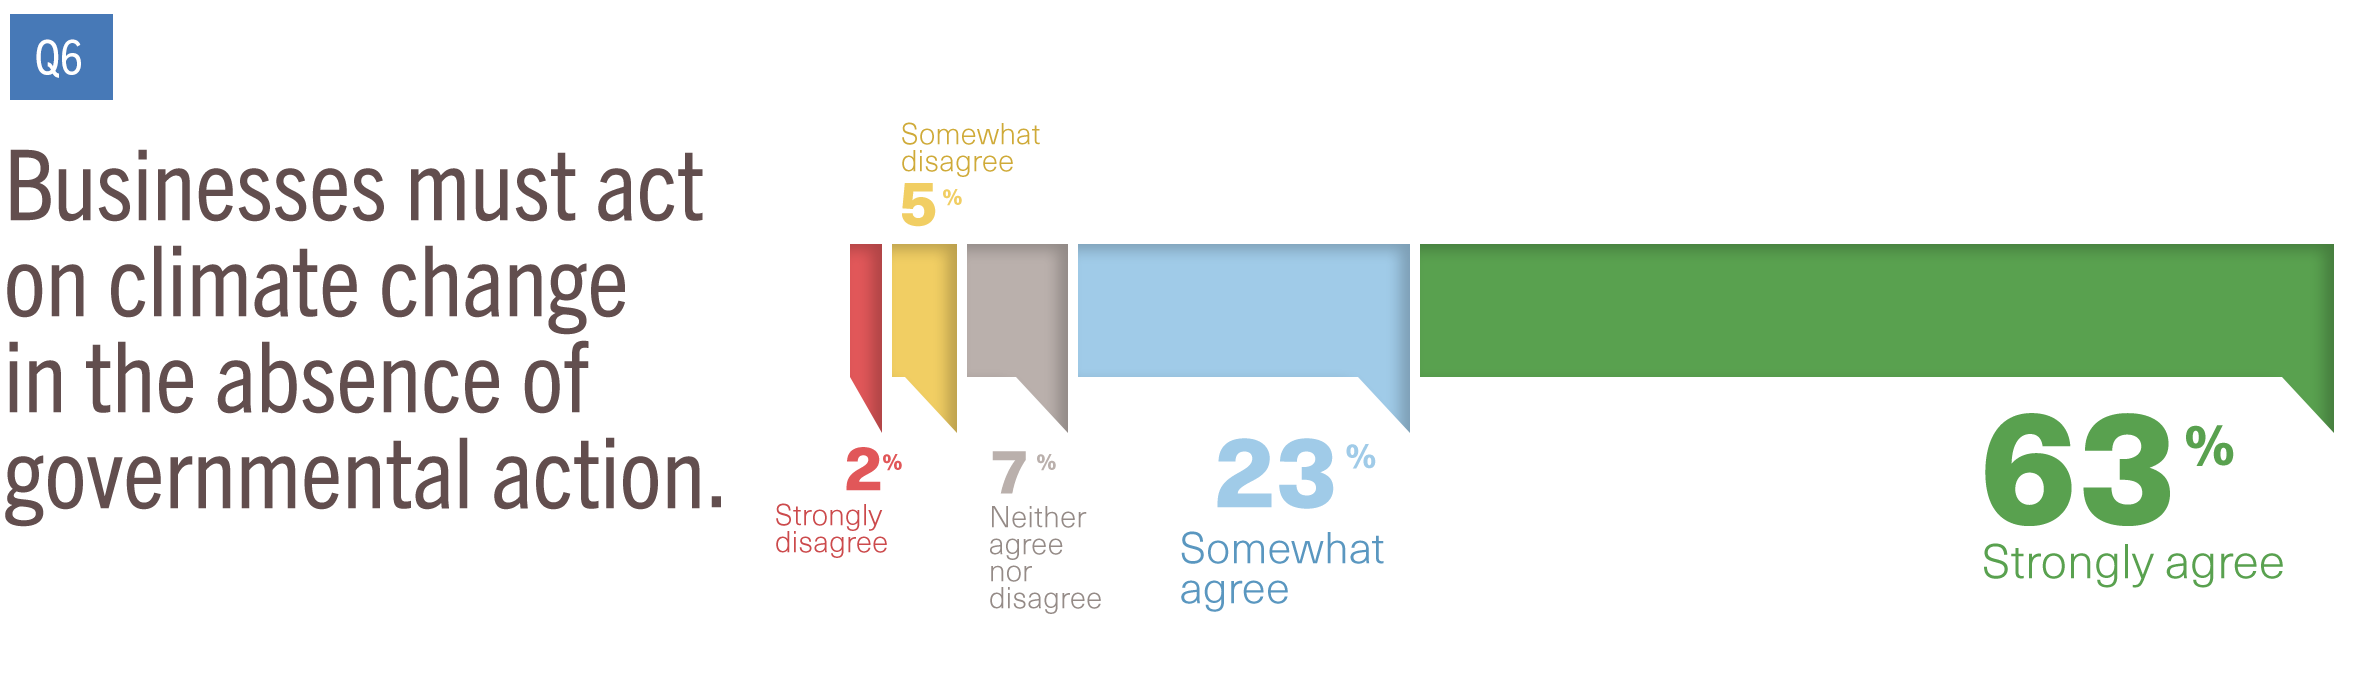 A chart showing the percentage of respondents who believe that business should act on climate regardless of government policy